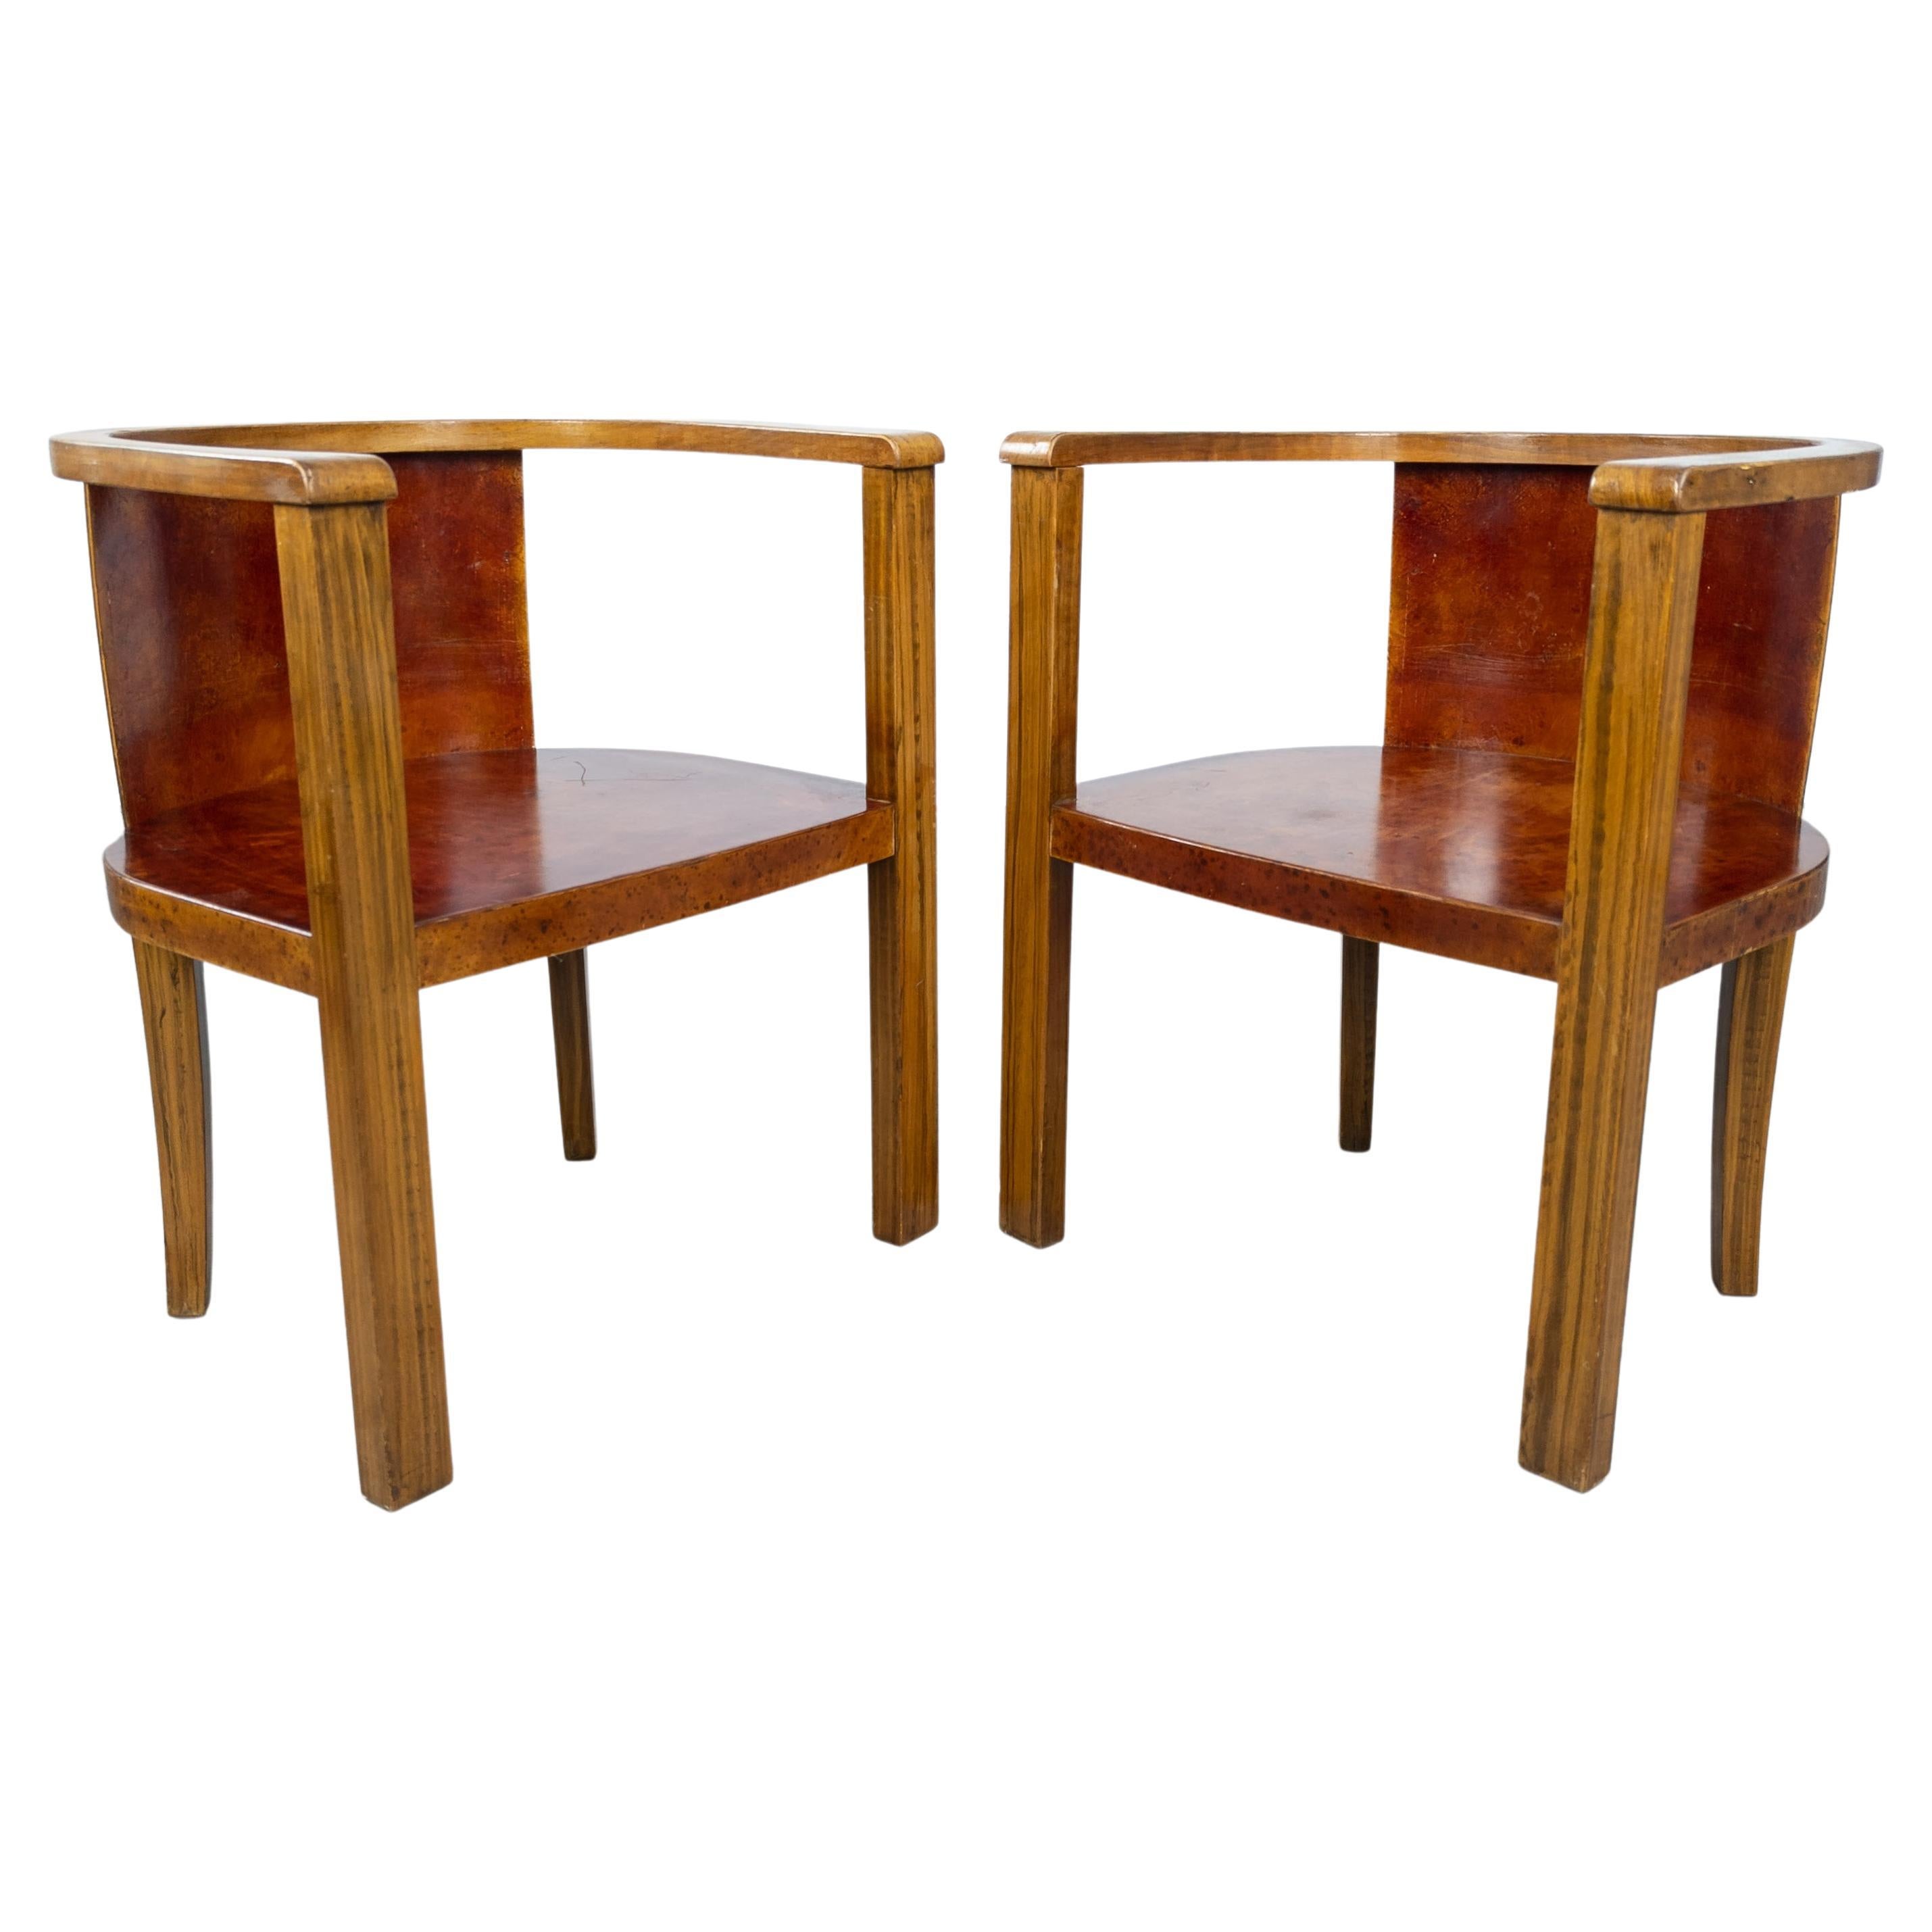 Pair of 1930's German Modernist Barrel Chairs For Sale